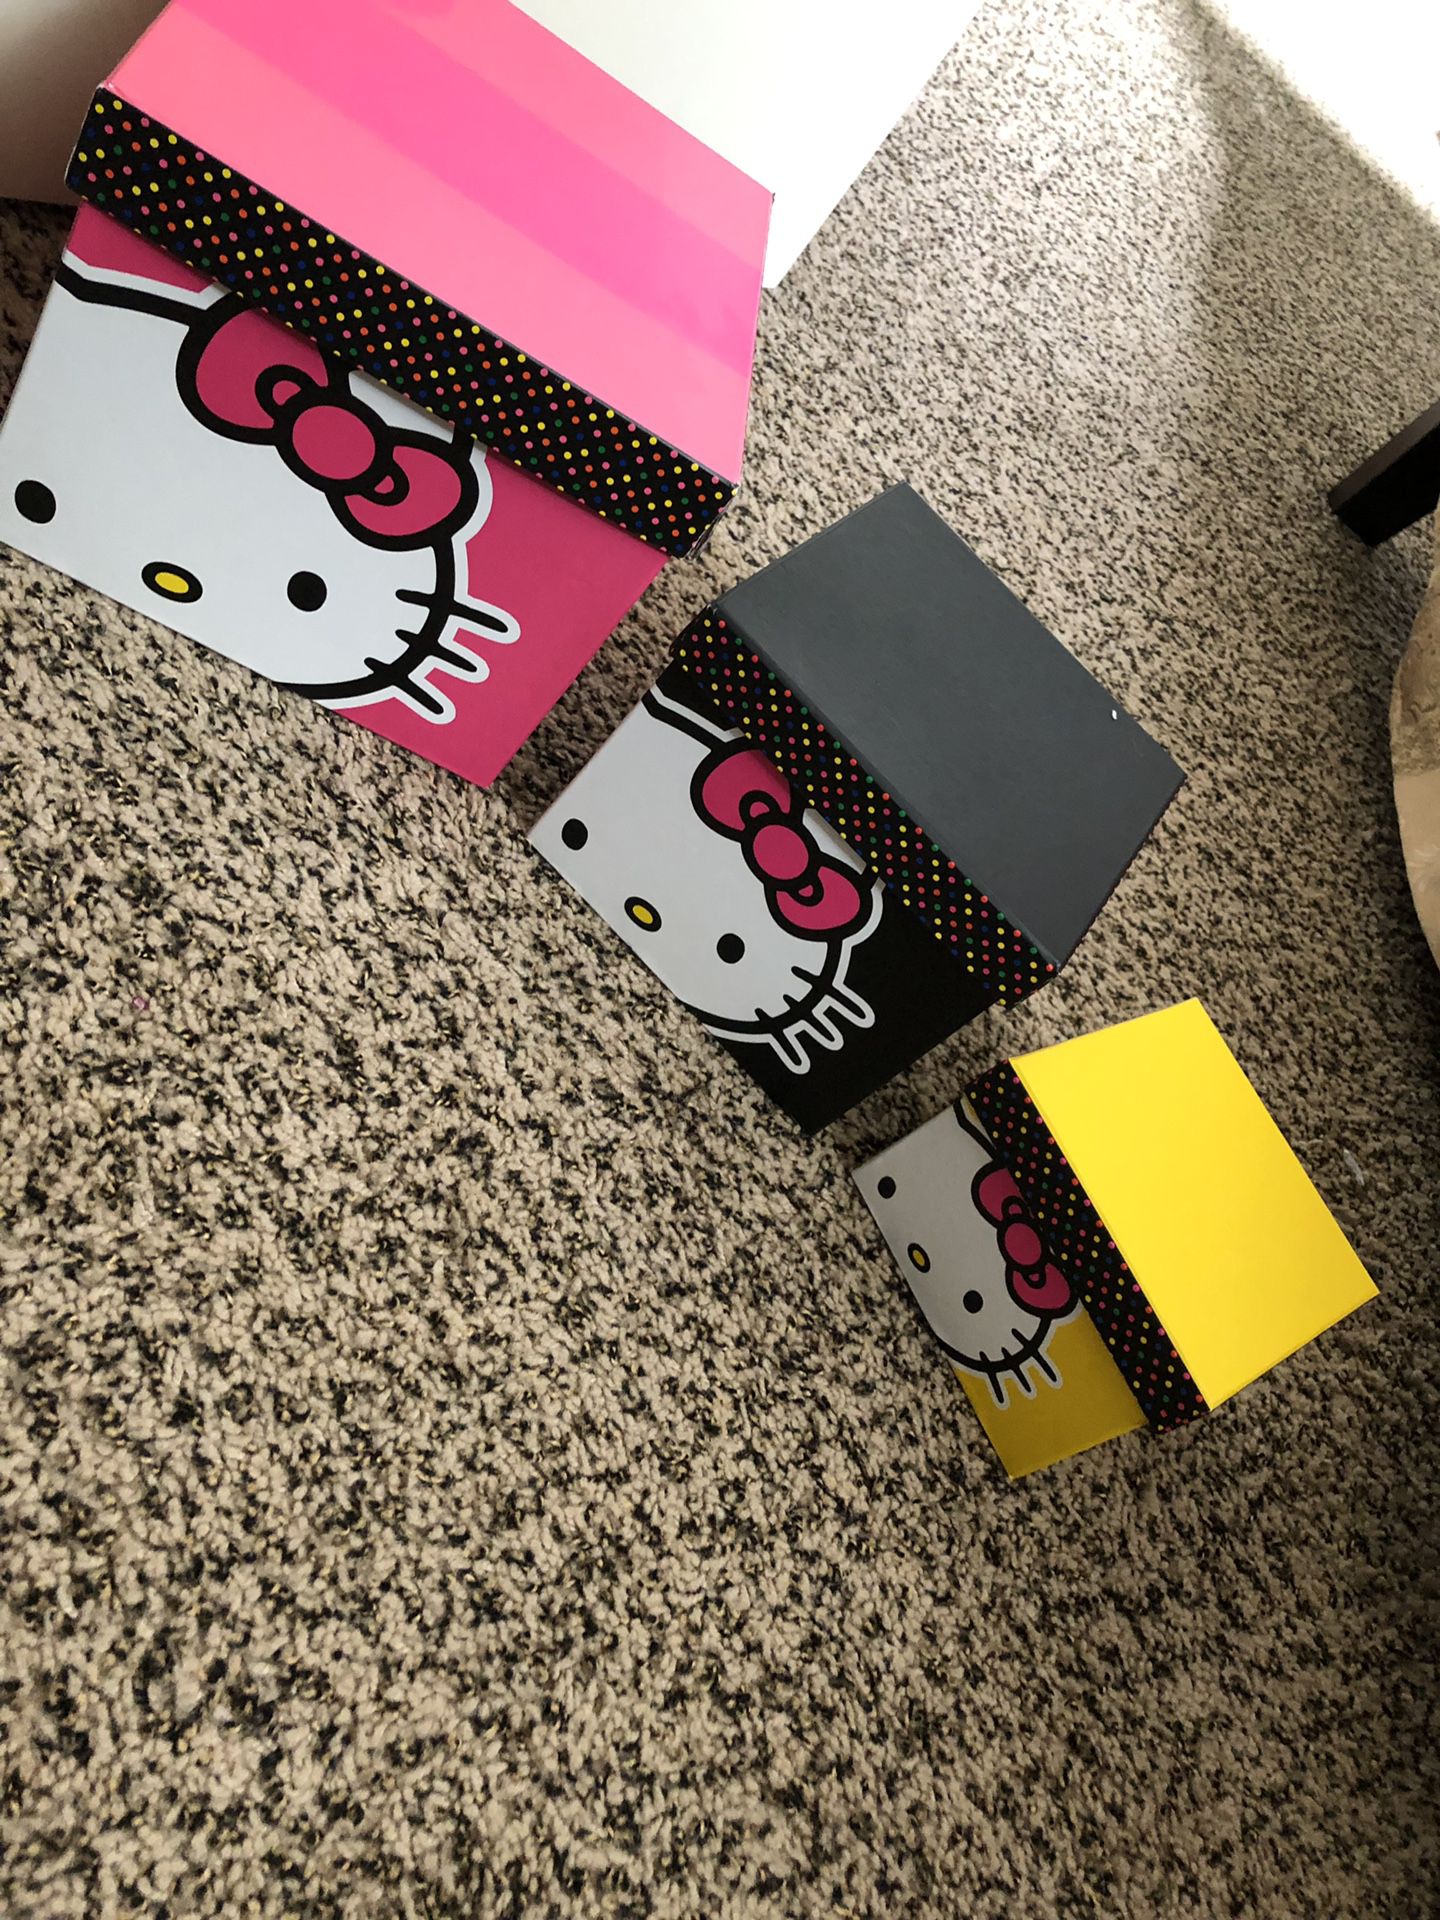 official hello kitty boxes 3 set